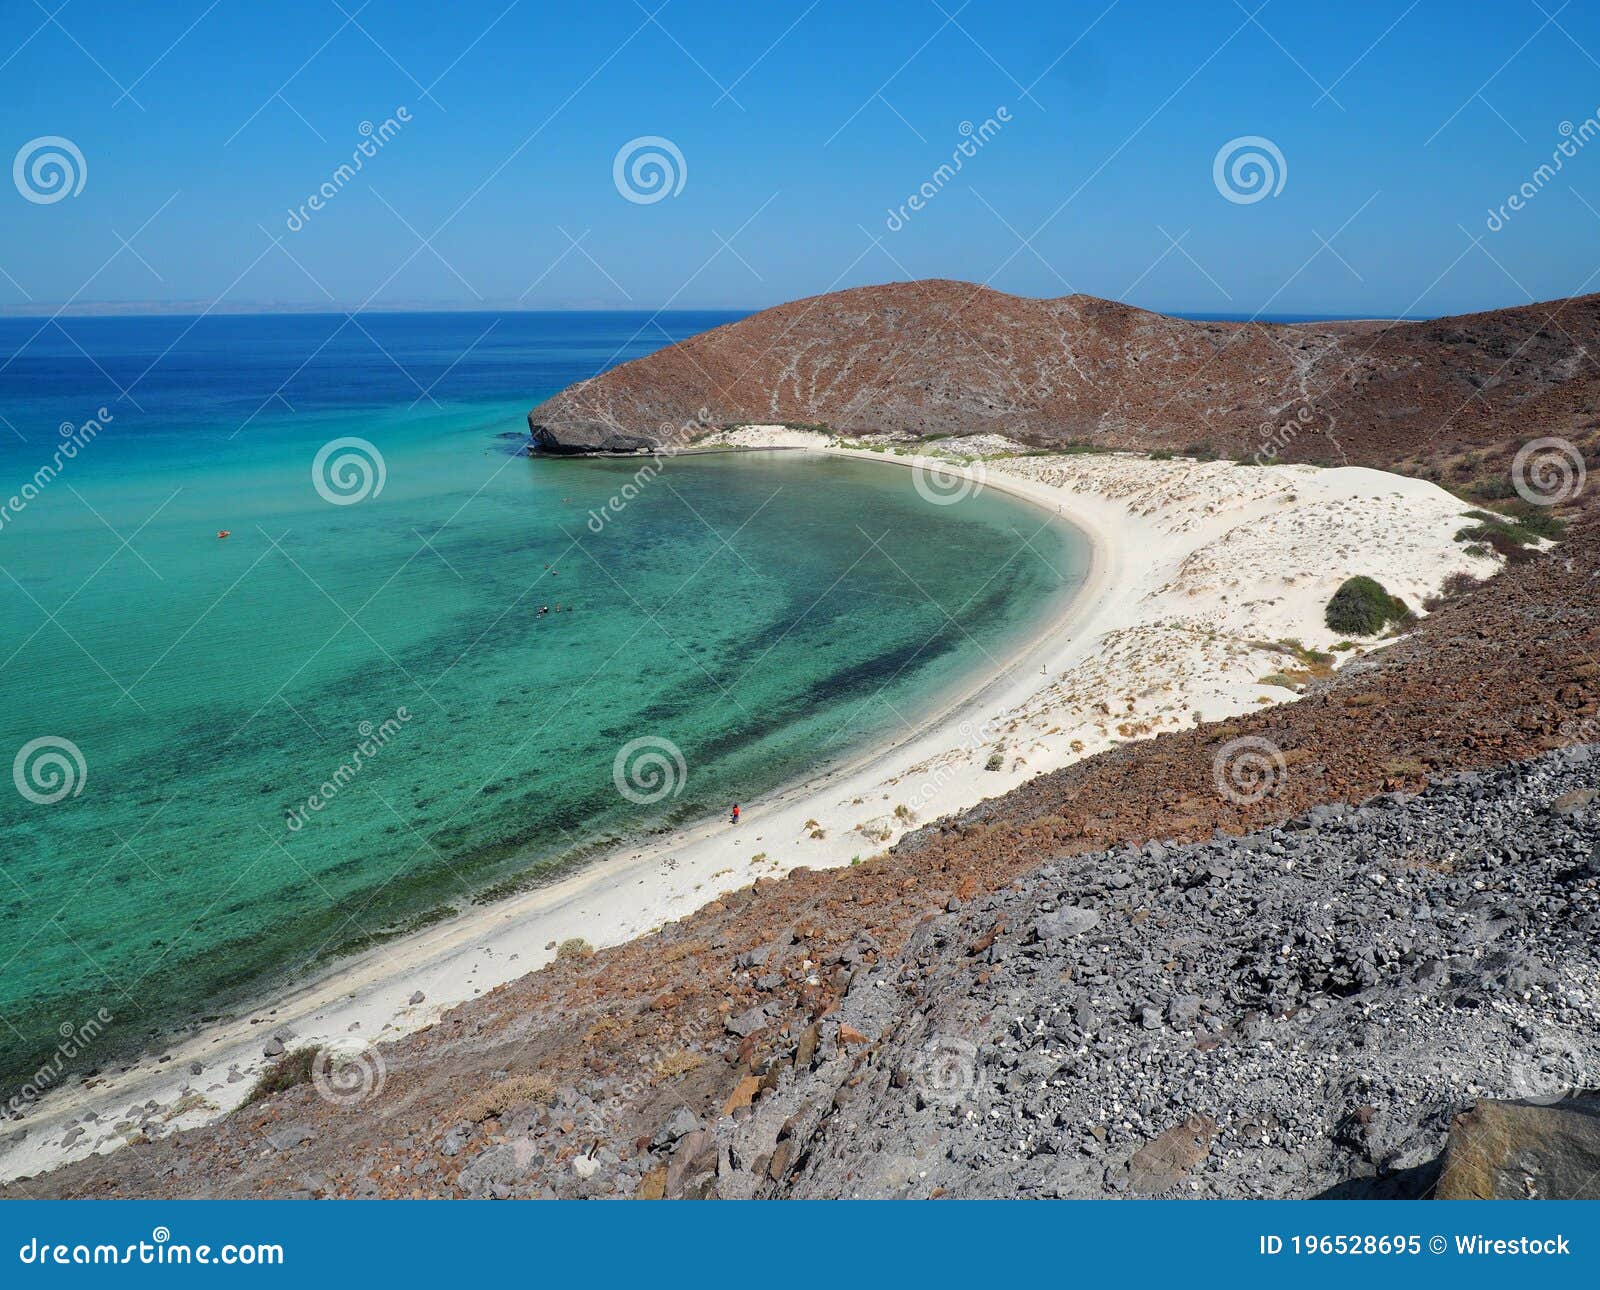 beautiful shot of the balandra beach located in mexico during daylight